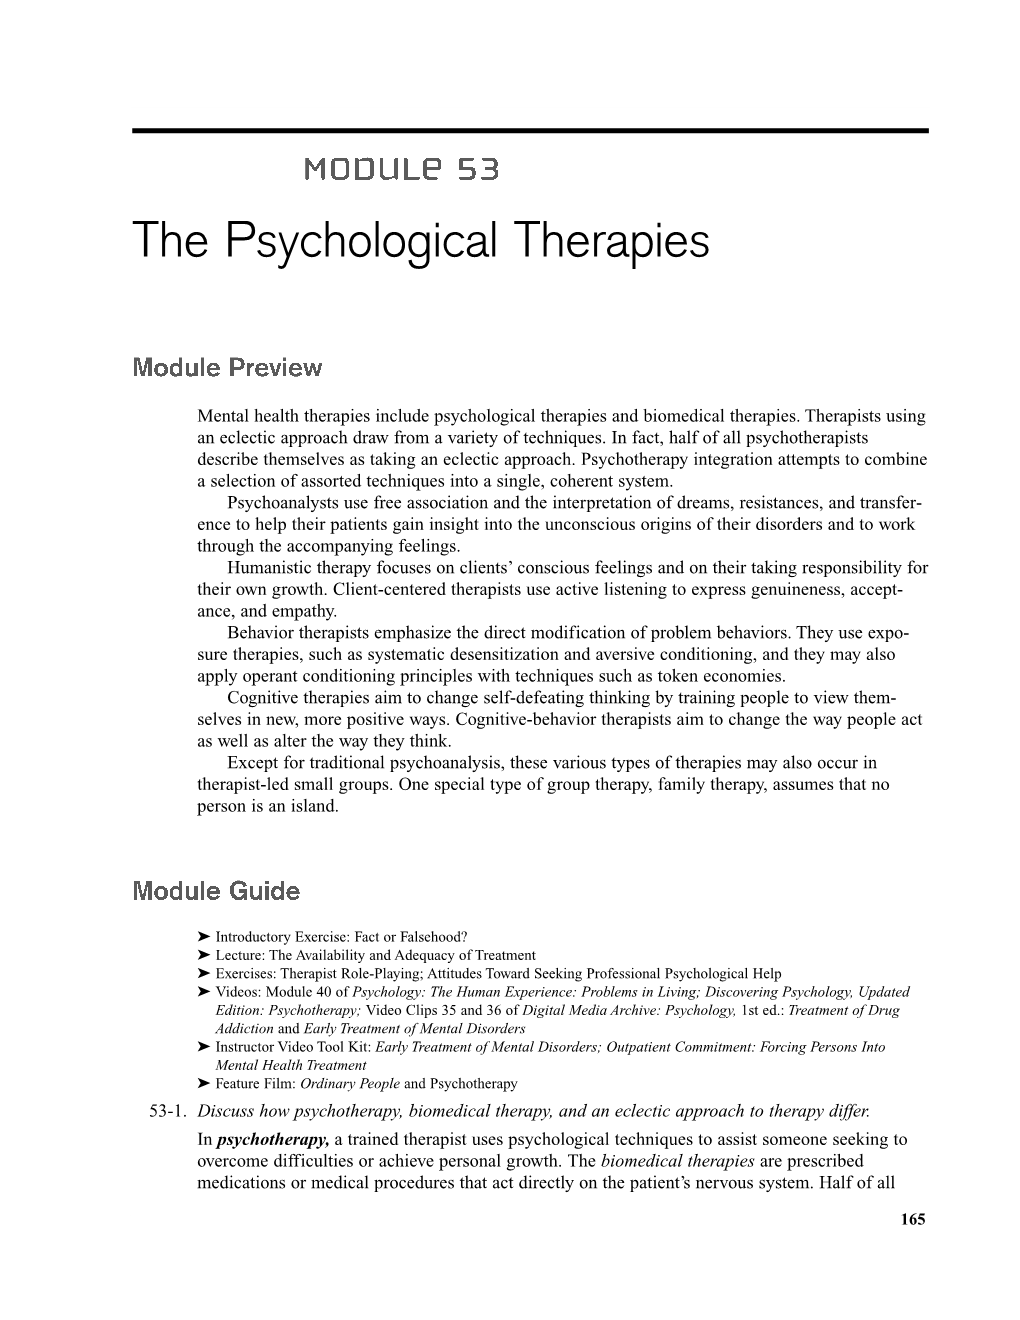 The Psychological Therapies